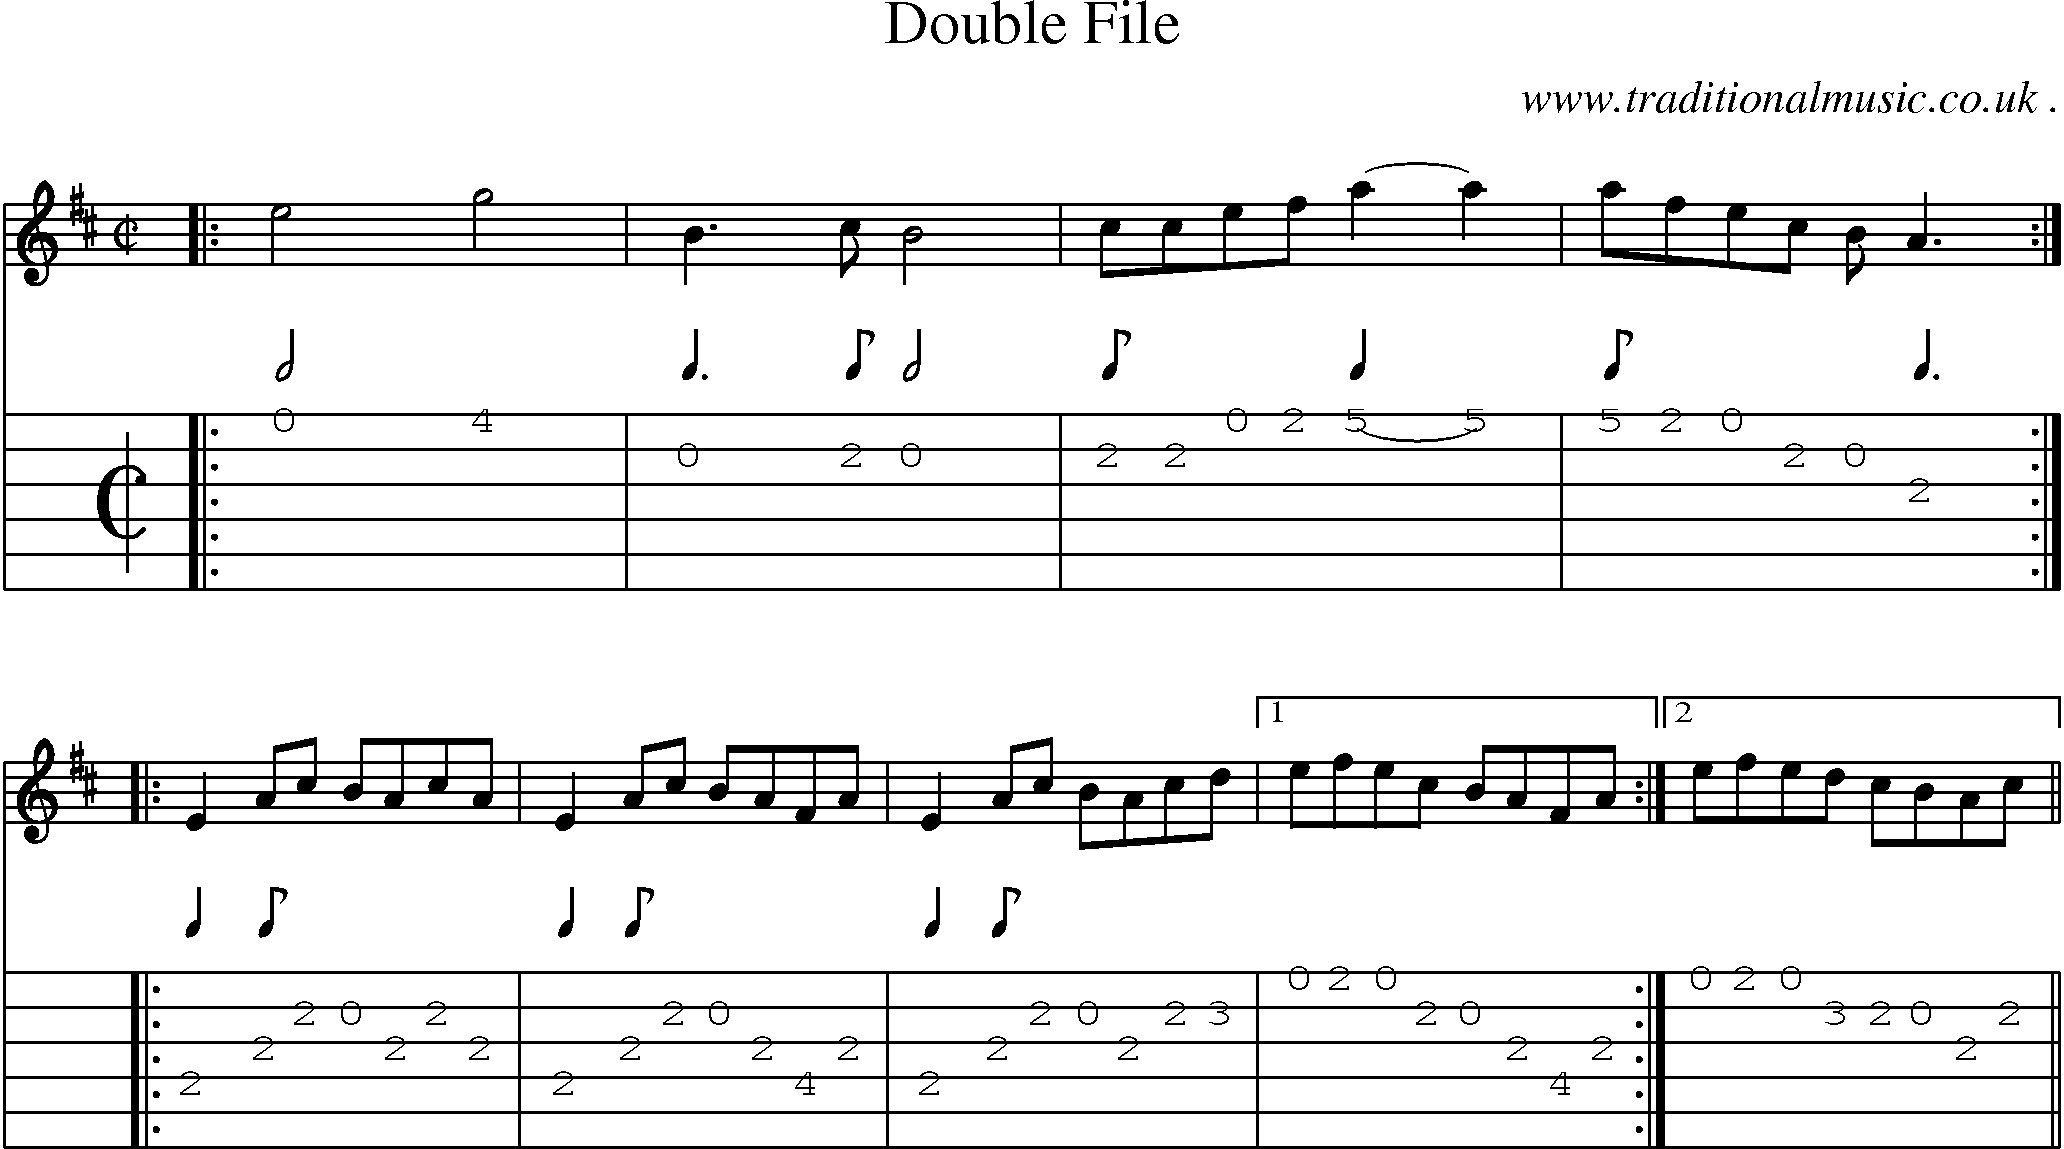 Music Score and Guitar Tabs for Double File